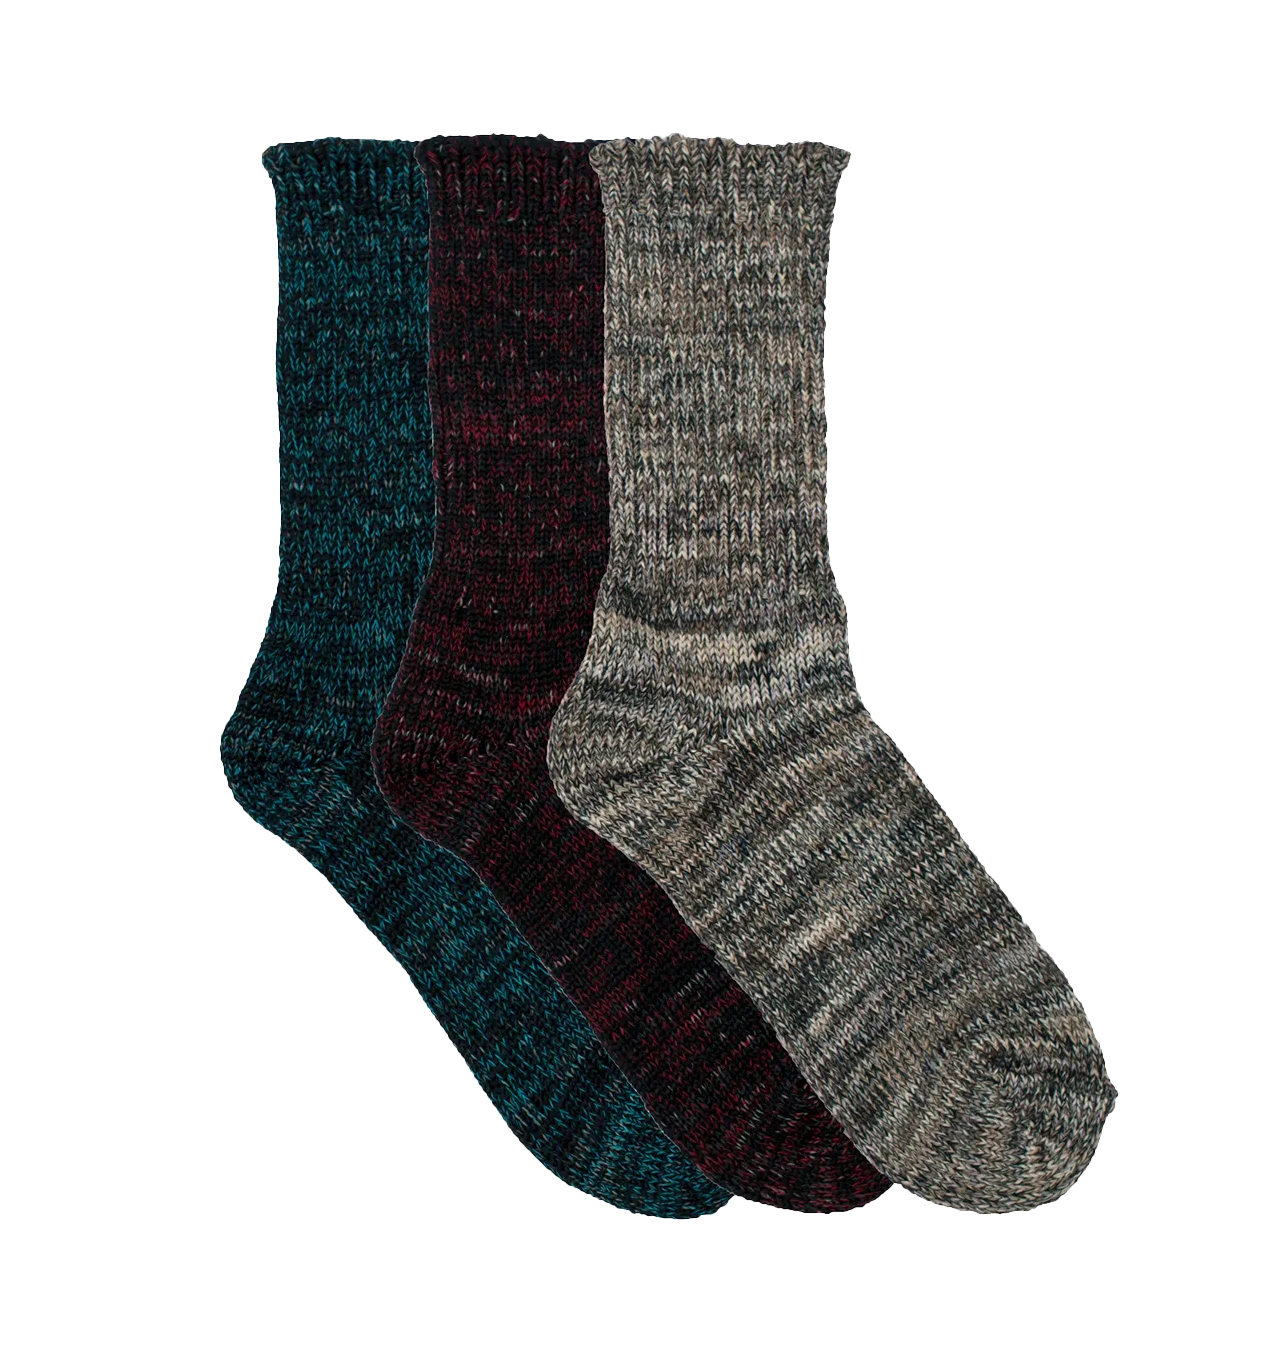 Resterods---Cozy-Ragg-Socks-3-Pack-(Mix99)---Mixed-Colors--1